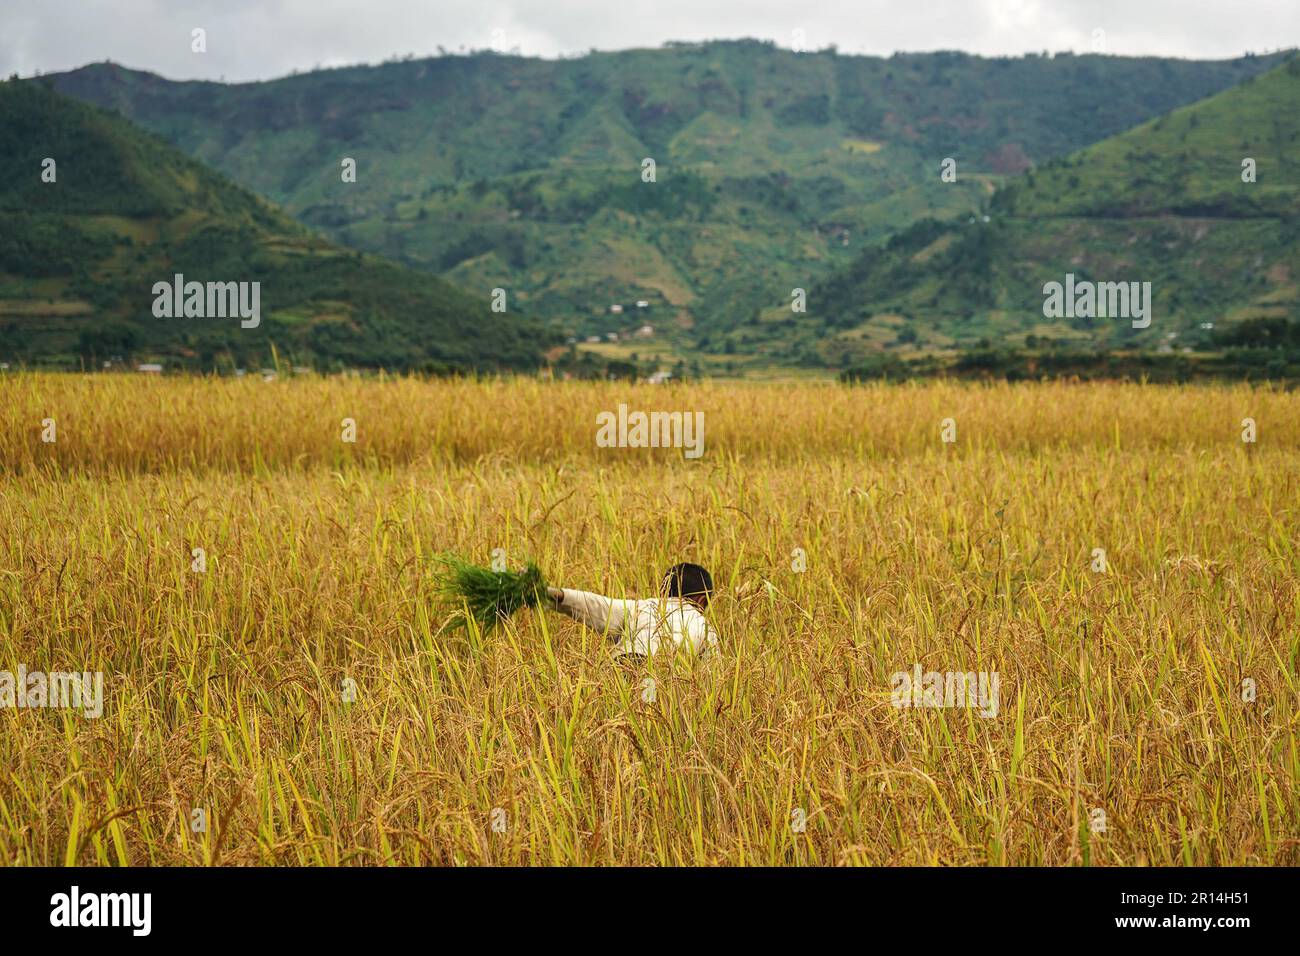 Unknown Malagasy boy weeding grass in rice field, working on his knees, view from behind, face not visible. Mountains with overcast sky background Stock Photo